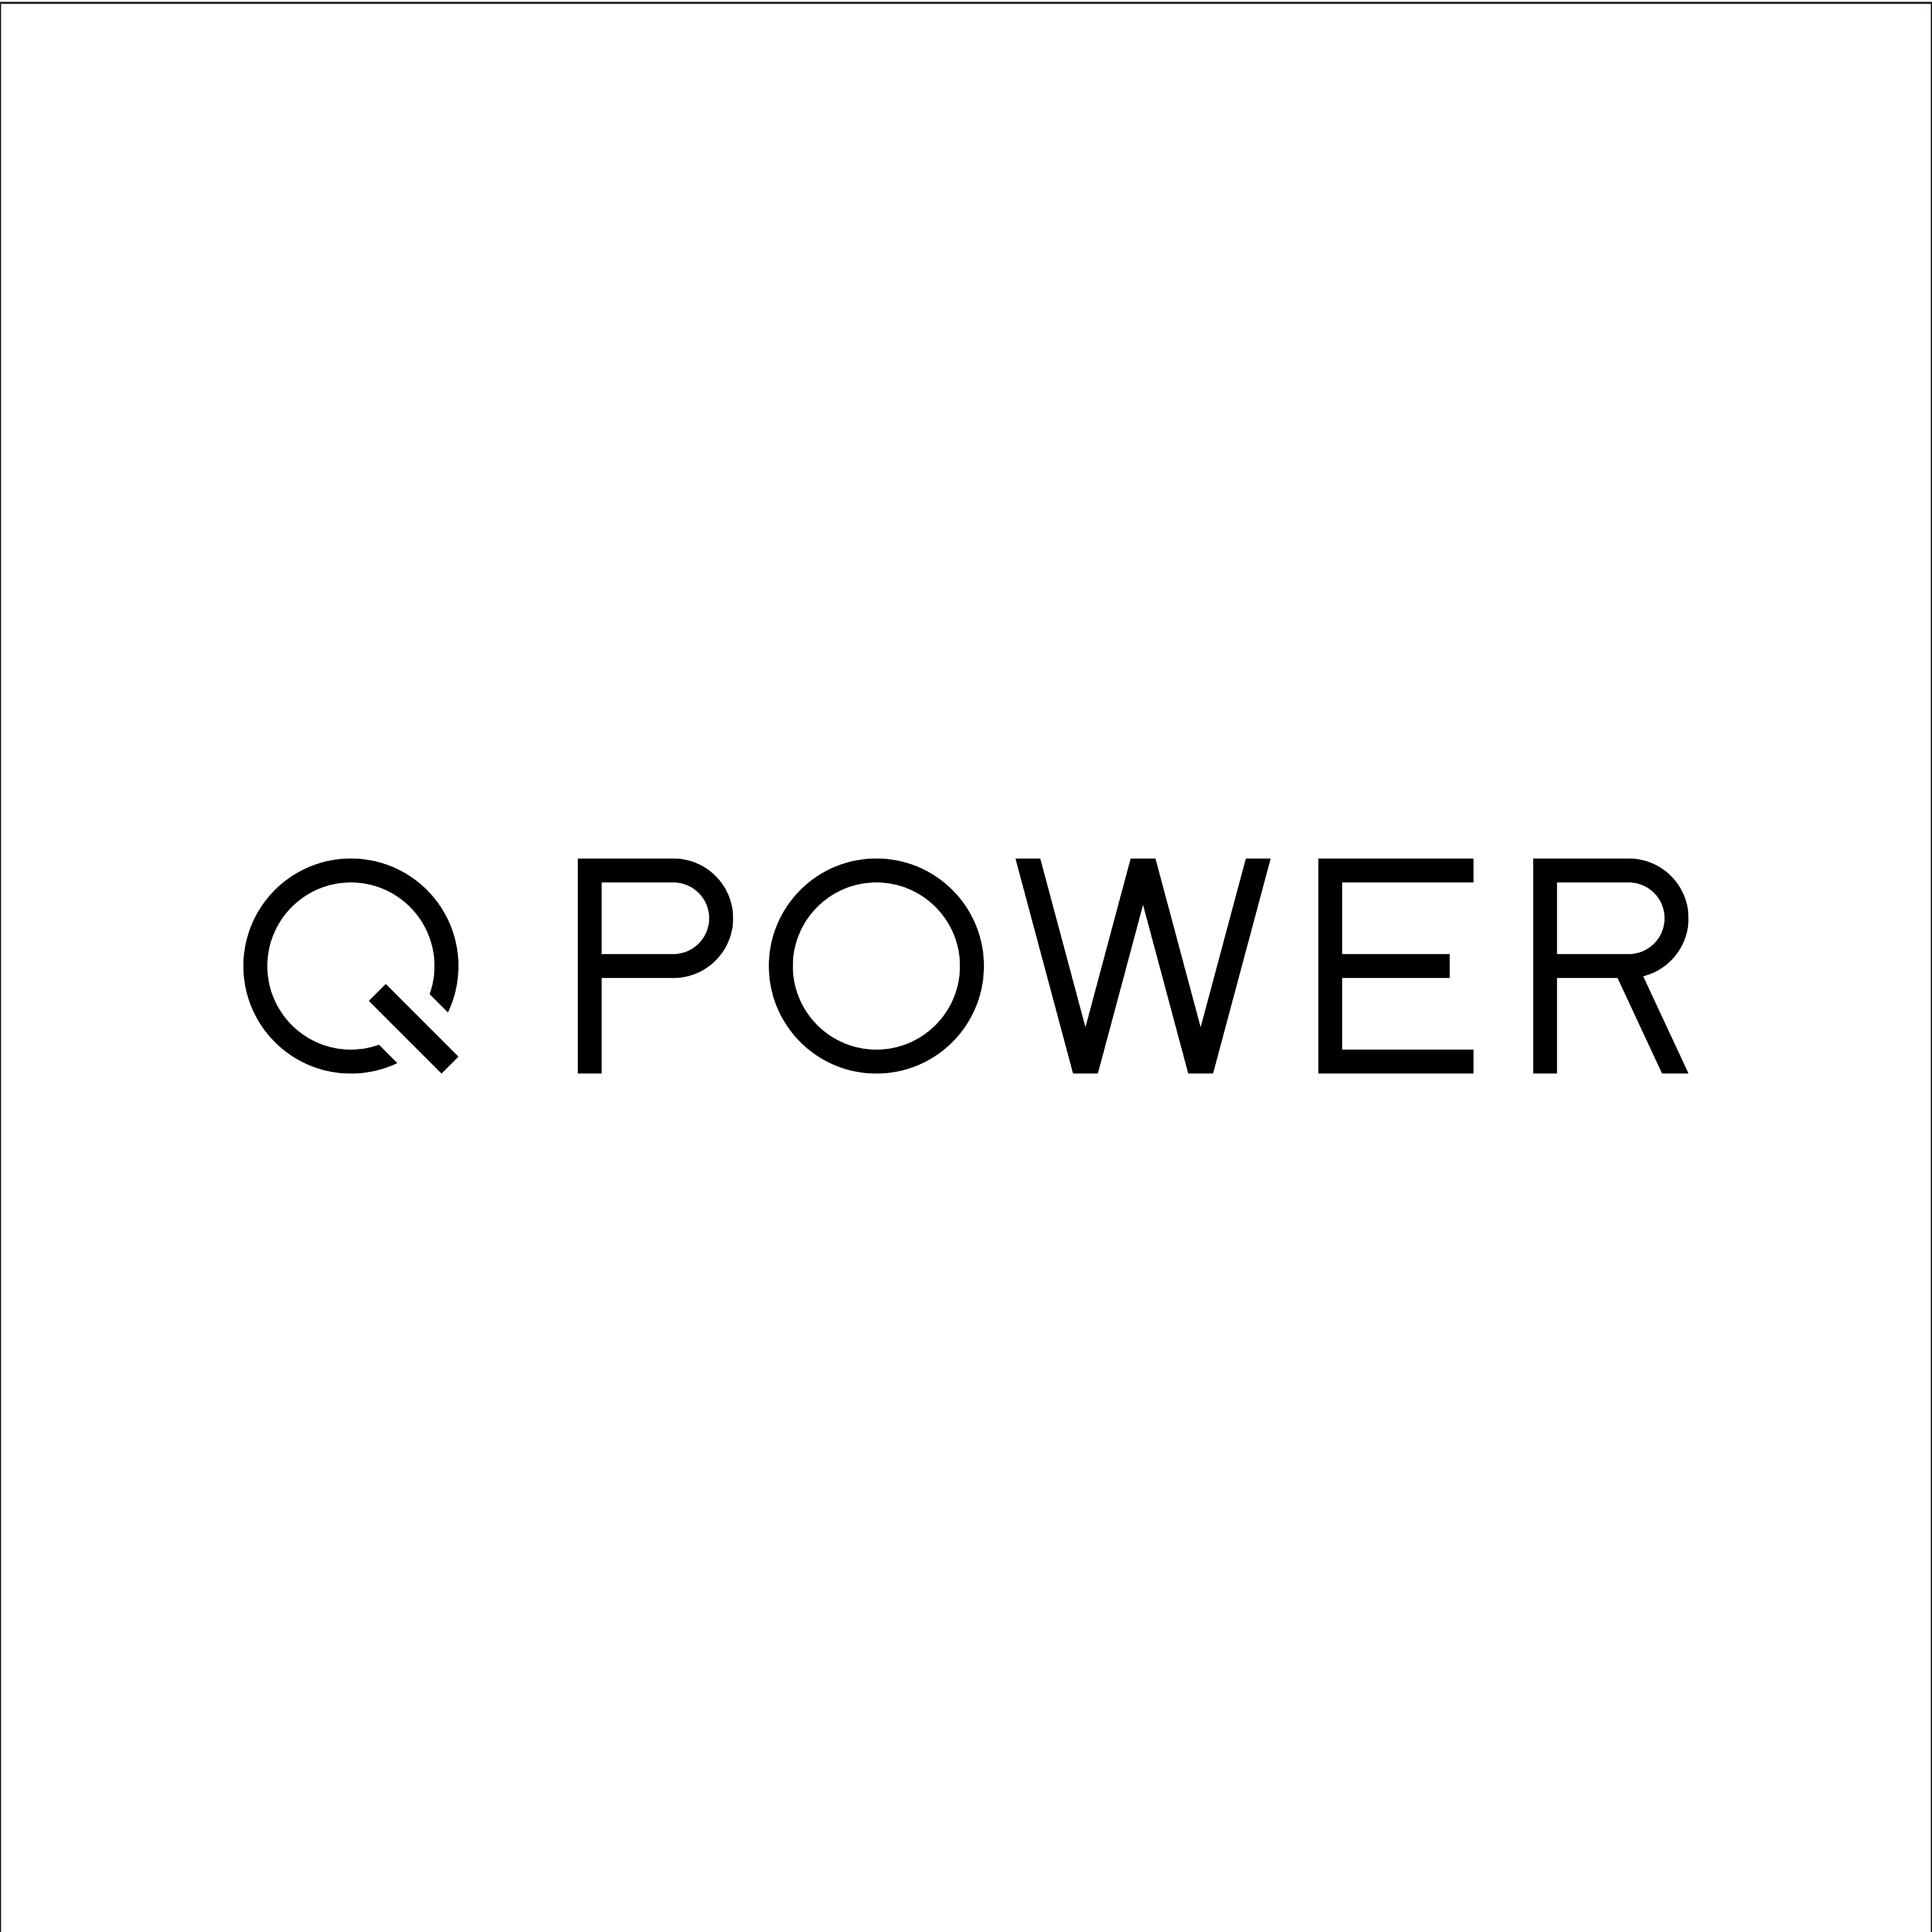 Q POWER Wordmark logo design by logo designer DSR Branding for your inspiration and for the worlds largest logo competition